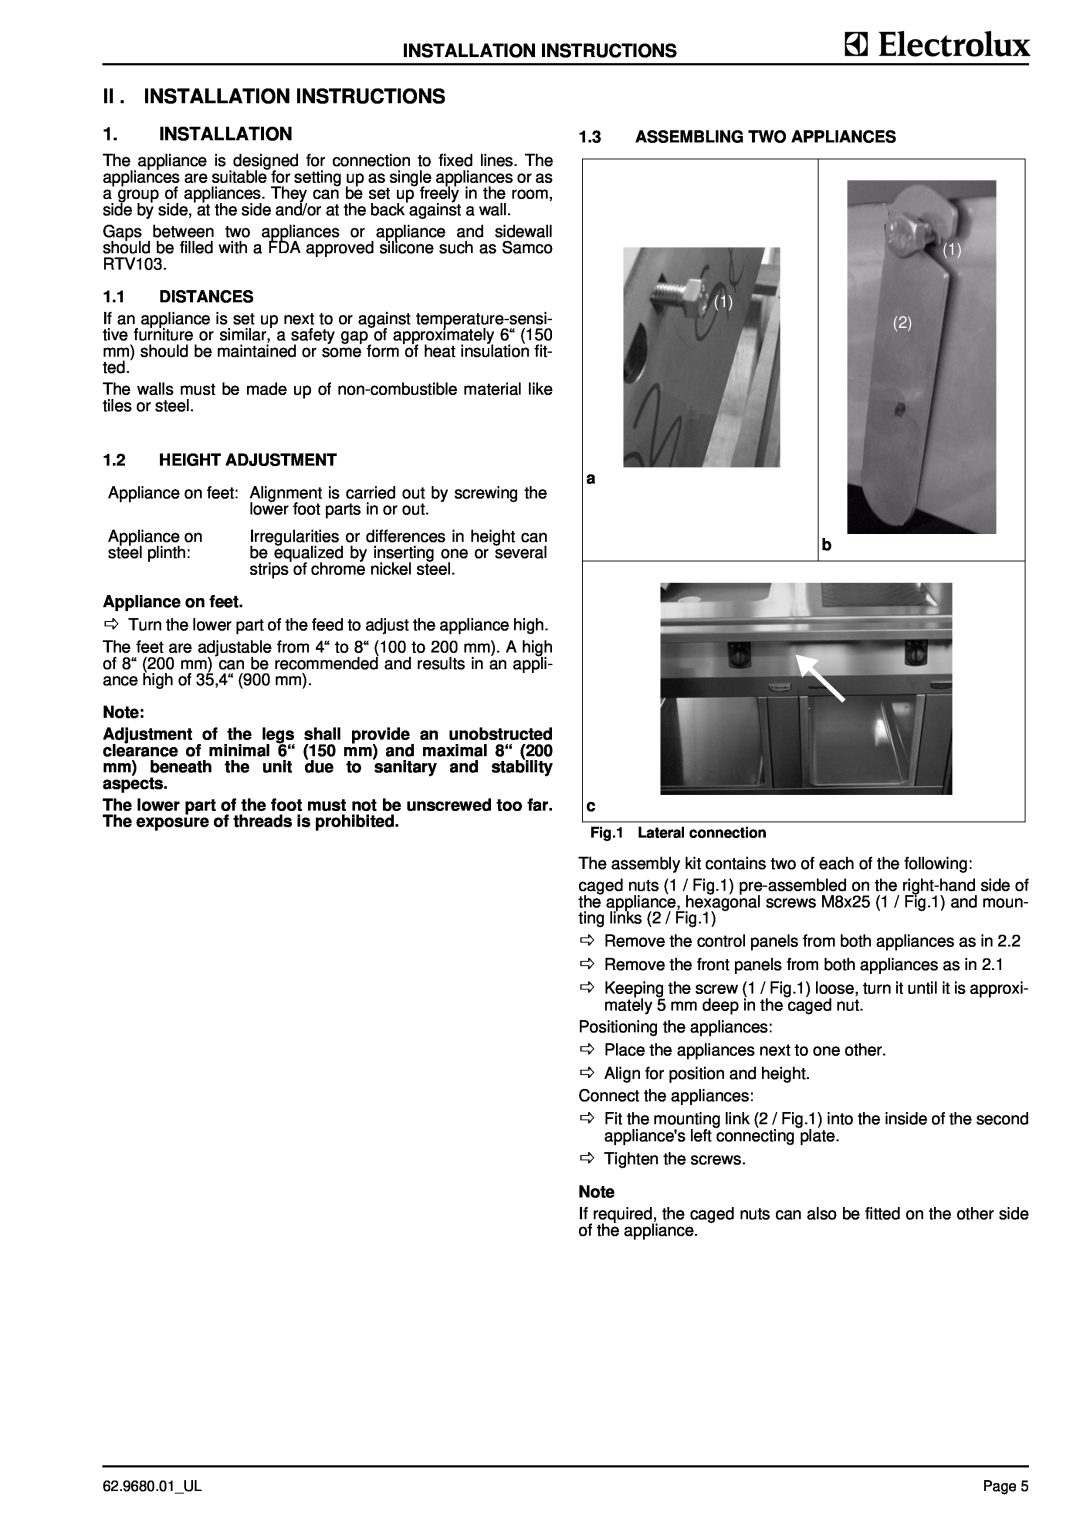 Electrolux 9CHG584139 manual Ii . Installation Instructions, Assembling Two Appliances, 1.1DISTANCES, 1.2HEIGHT ADJUSTMENT 